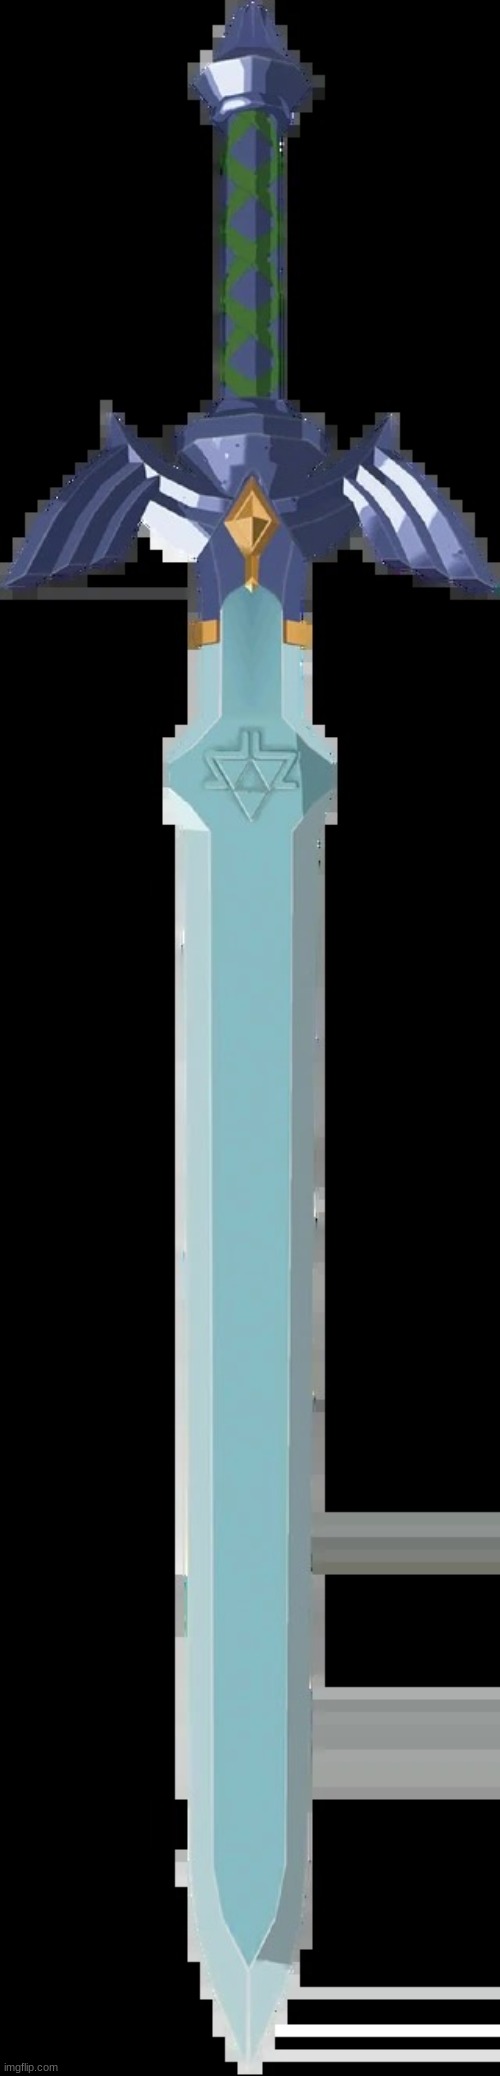 Master sword | image tagged in master sword | made w/ Imgflip meme maker